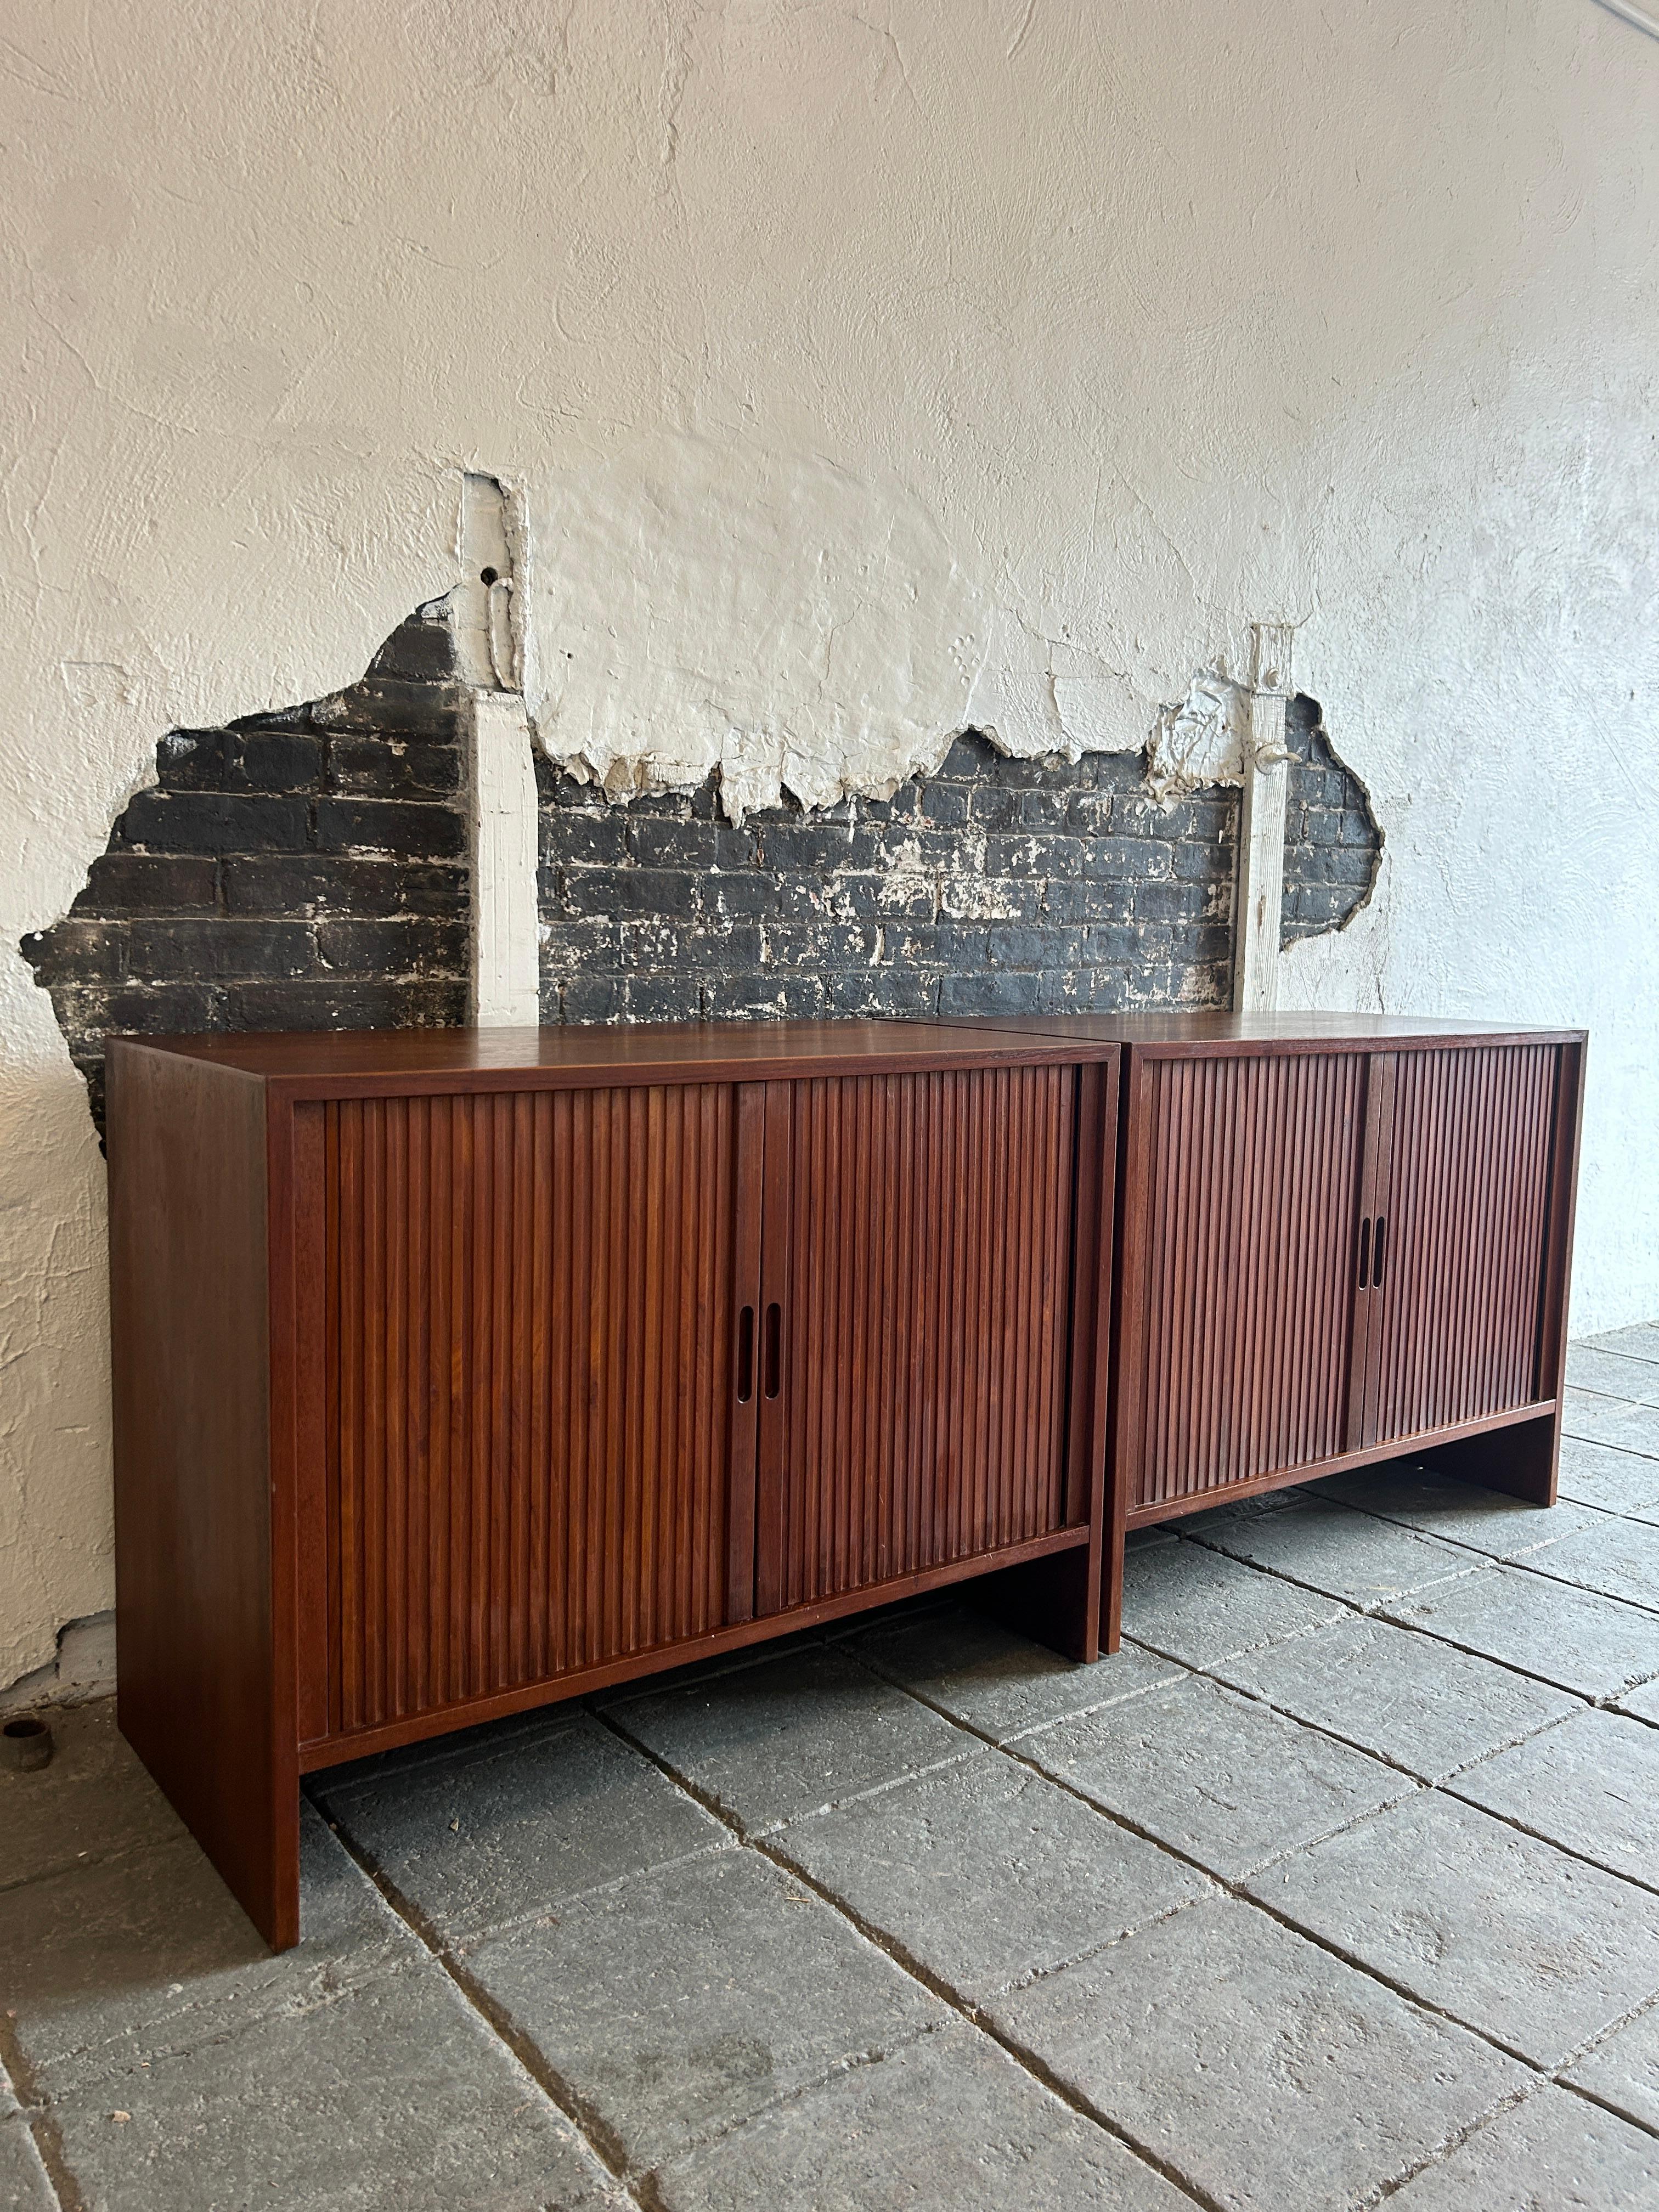 Pair of Beautiful Danish dark teak tabour door credenzas designed by Hans J. Wegner Circa 1960. One credenza has 2 birch adjustable shelves that are removable the other has 6 birch drawers. The Tambour doors both slide smooth and all drawers slide